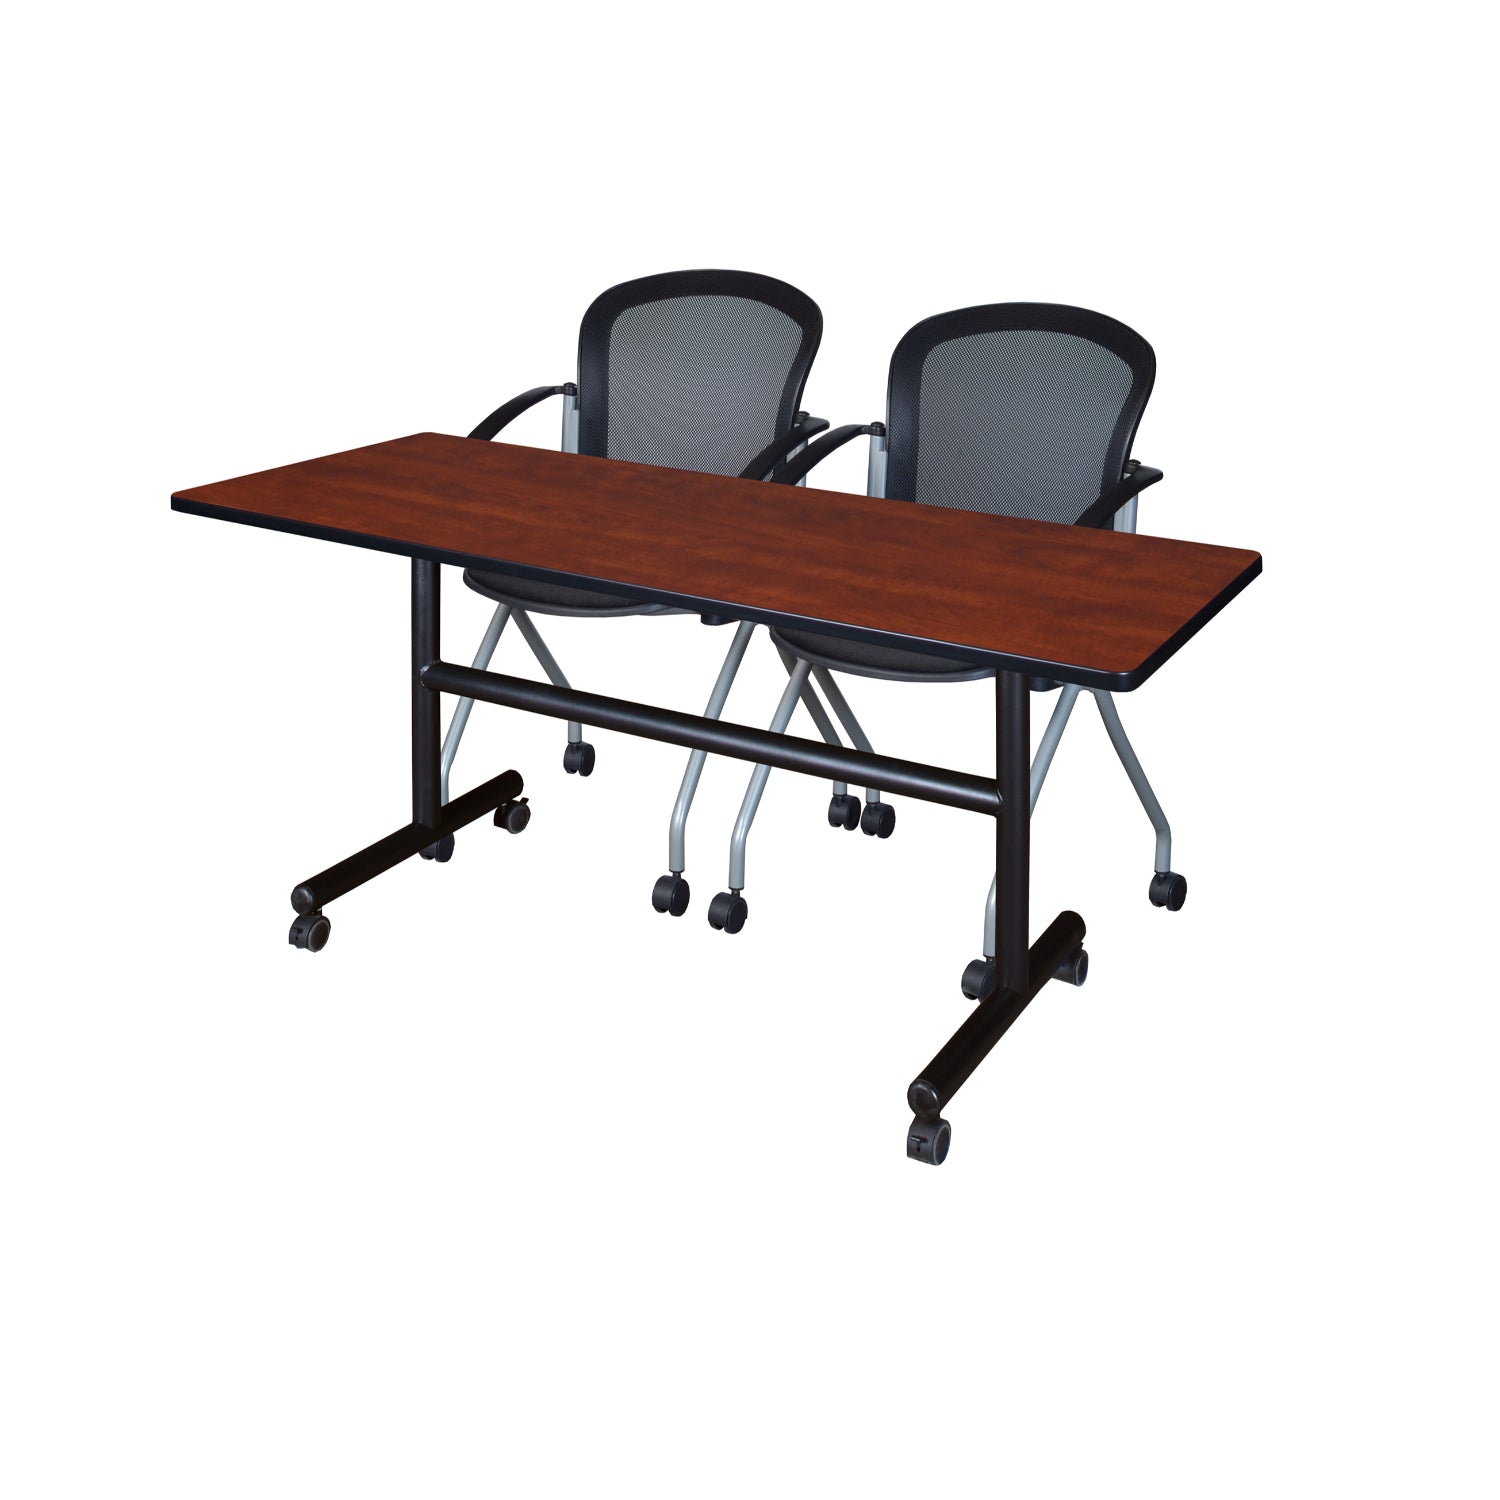 Kobe Flip Top Training Table and Chair Package, Kobe 60" x 24" Flip Top Mobile Nesting Table with 2 Cadence Nesting Chairs